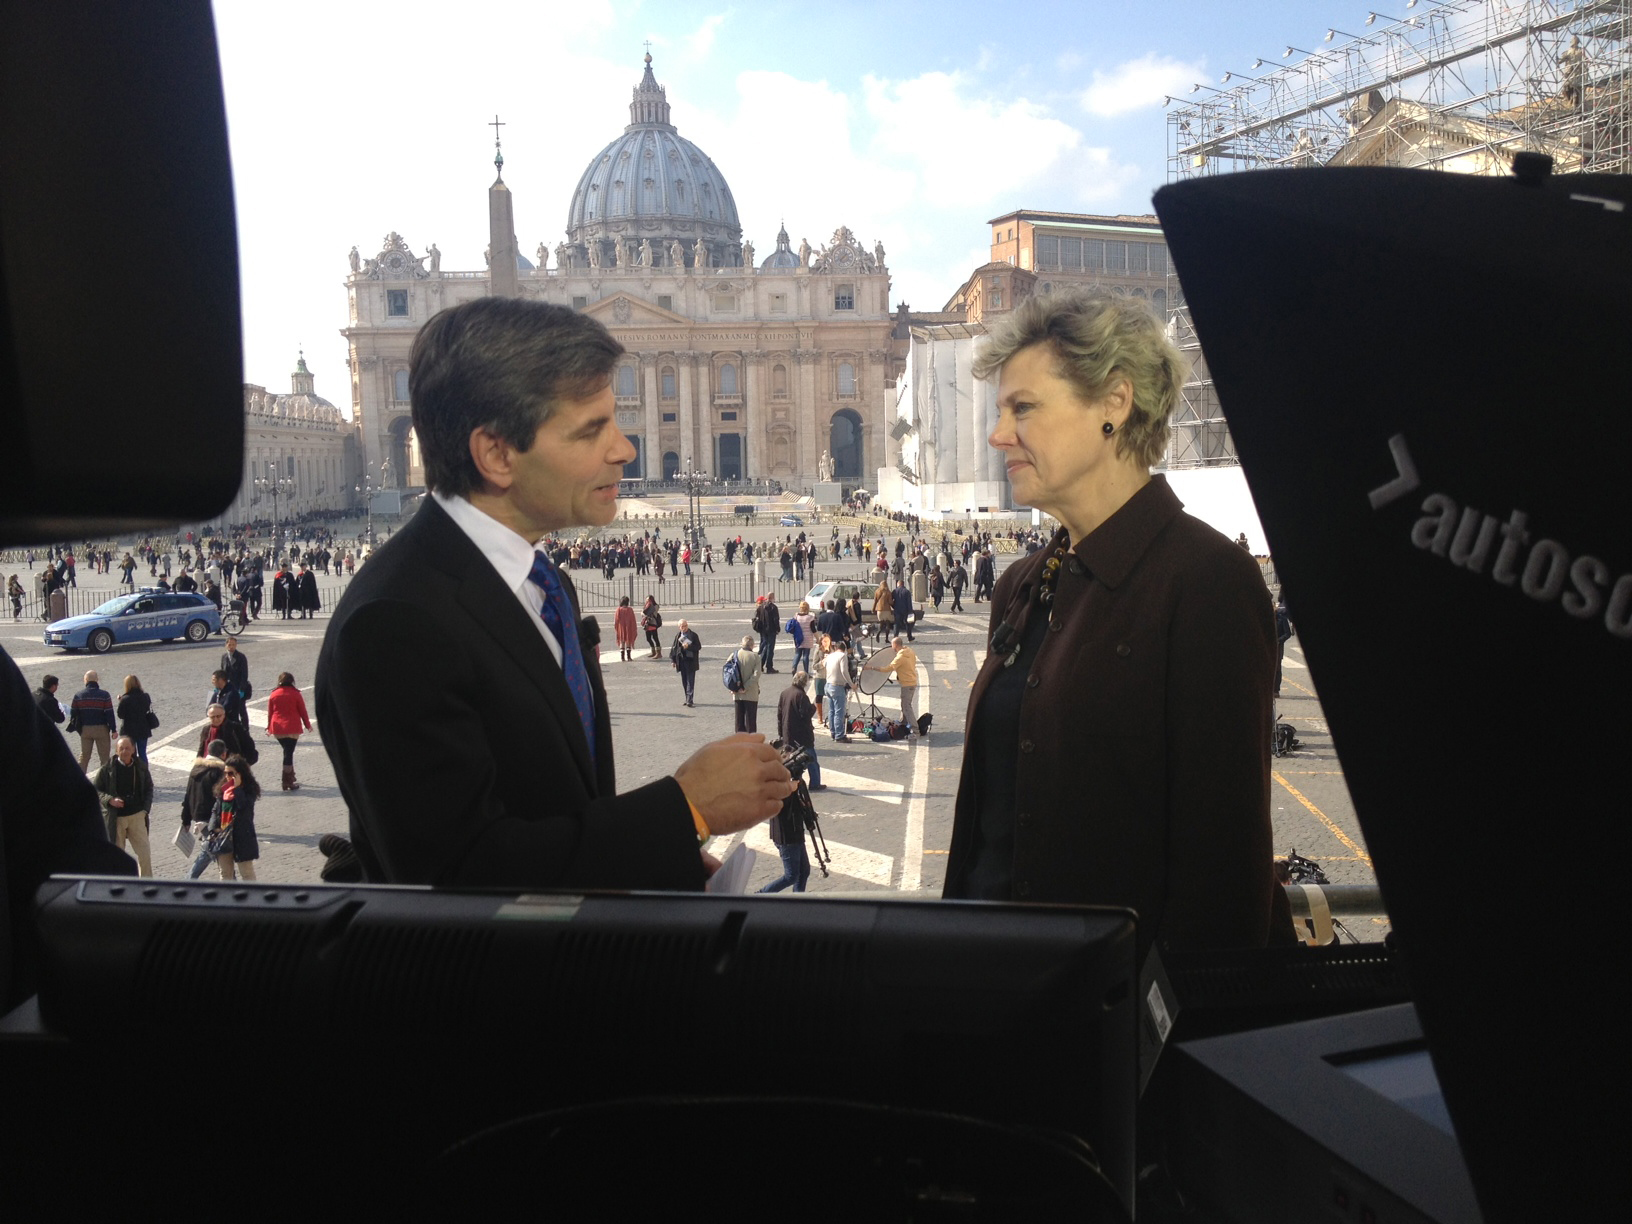 PHOTO: George Stephanopoulos and Cokie  Roberts are shown during coverage from Vatican City in Rome, Italy, of the resignation of Pope Benedict XVI and the selection of his successor, Feb. 28, 2013.